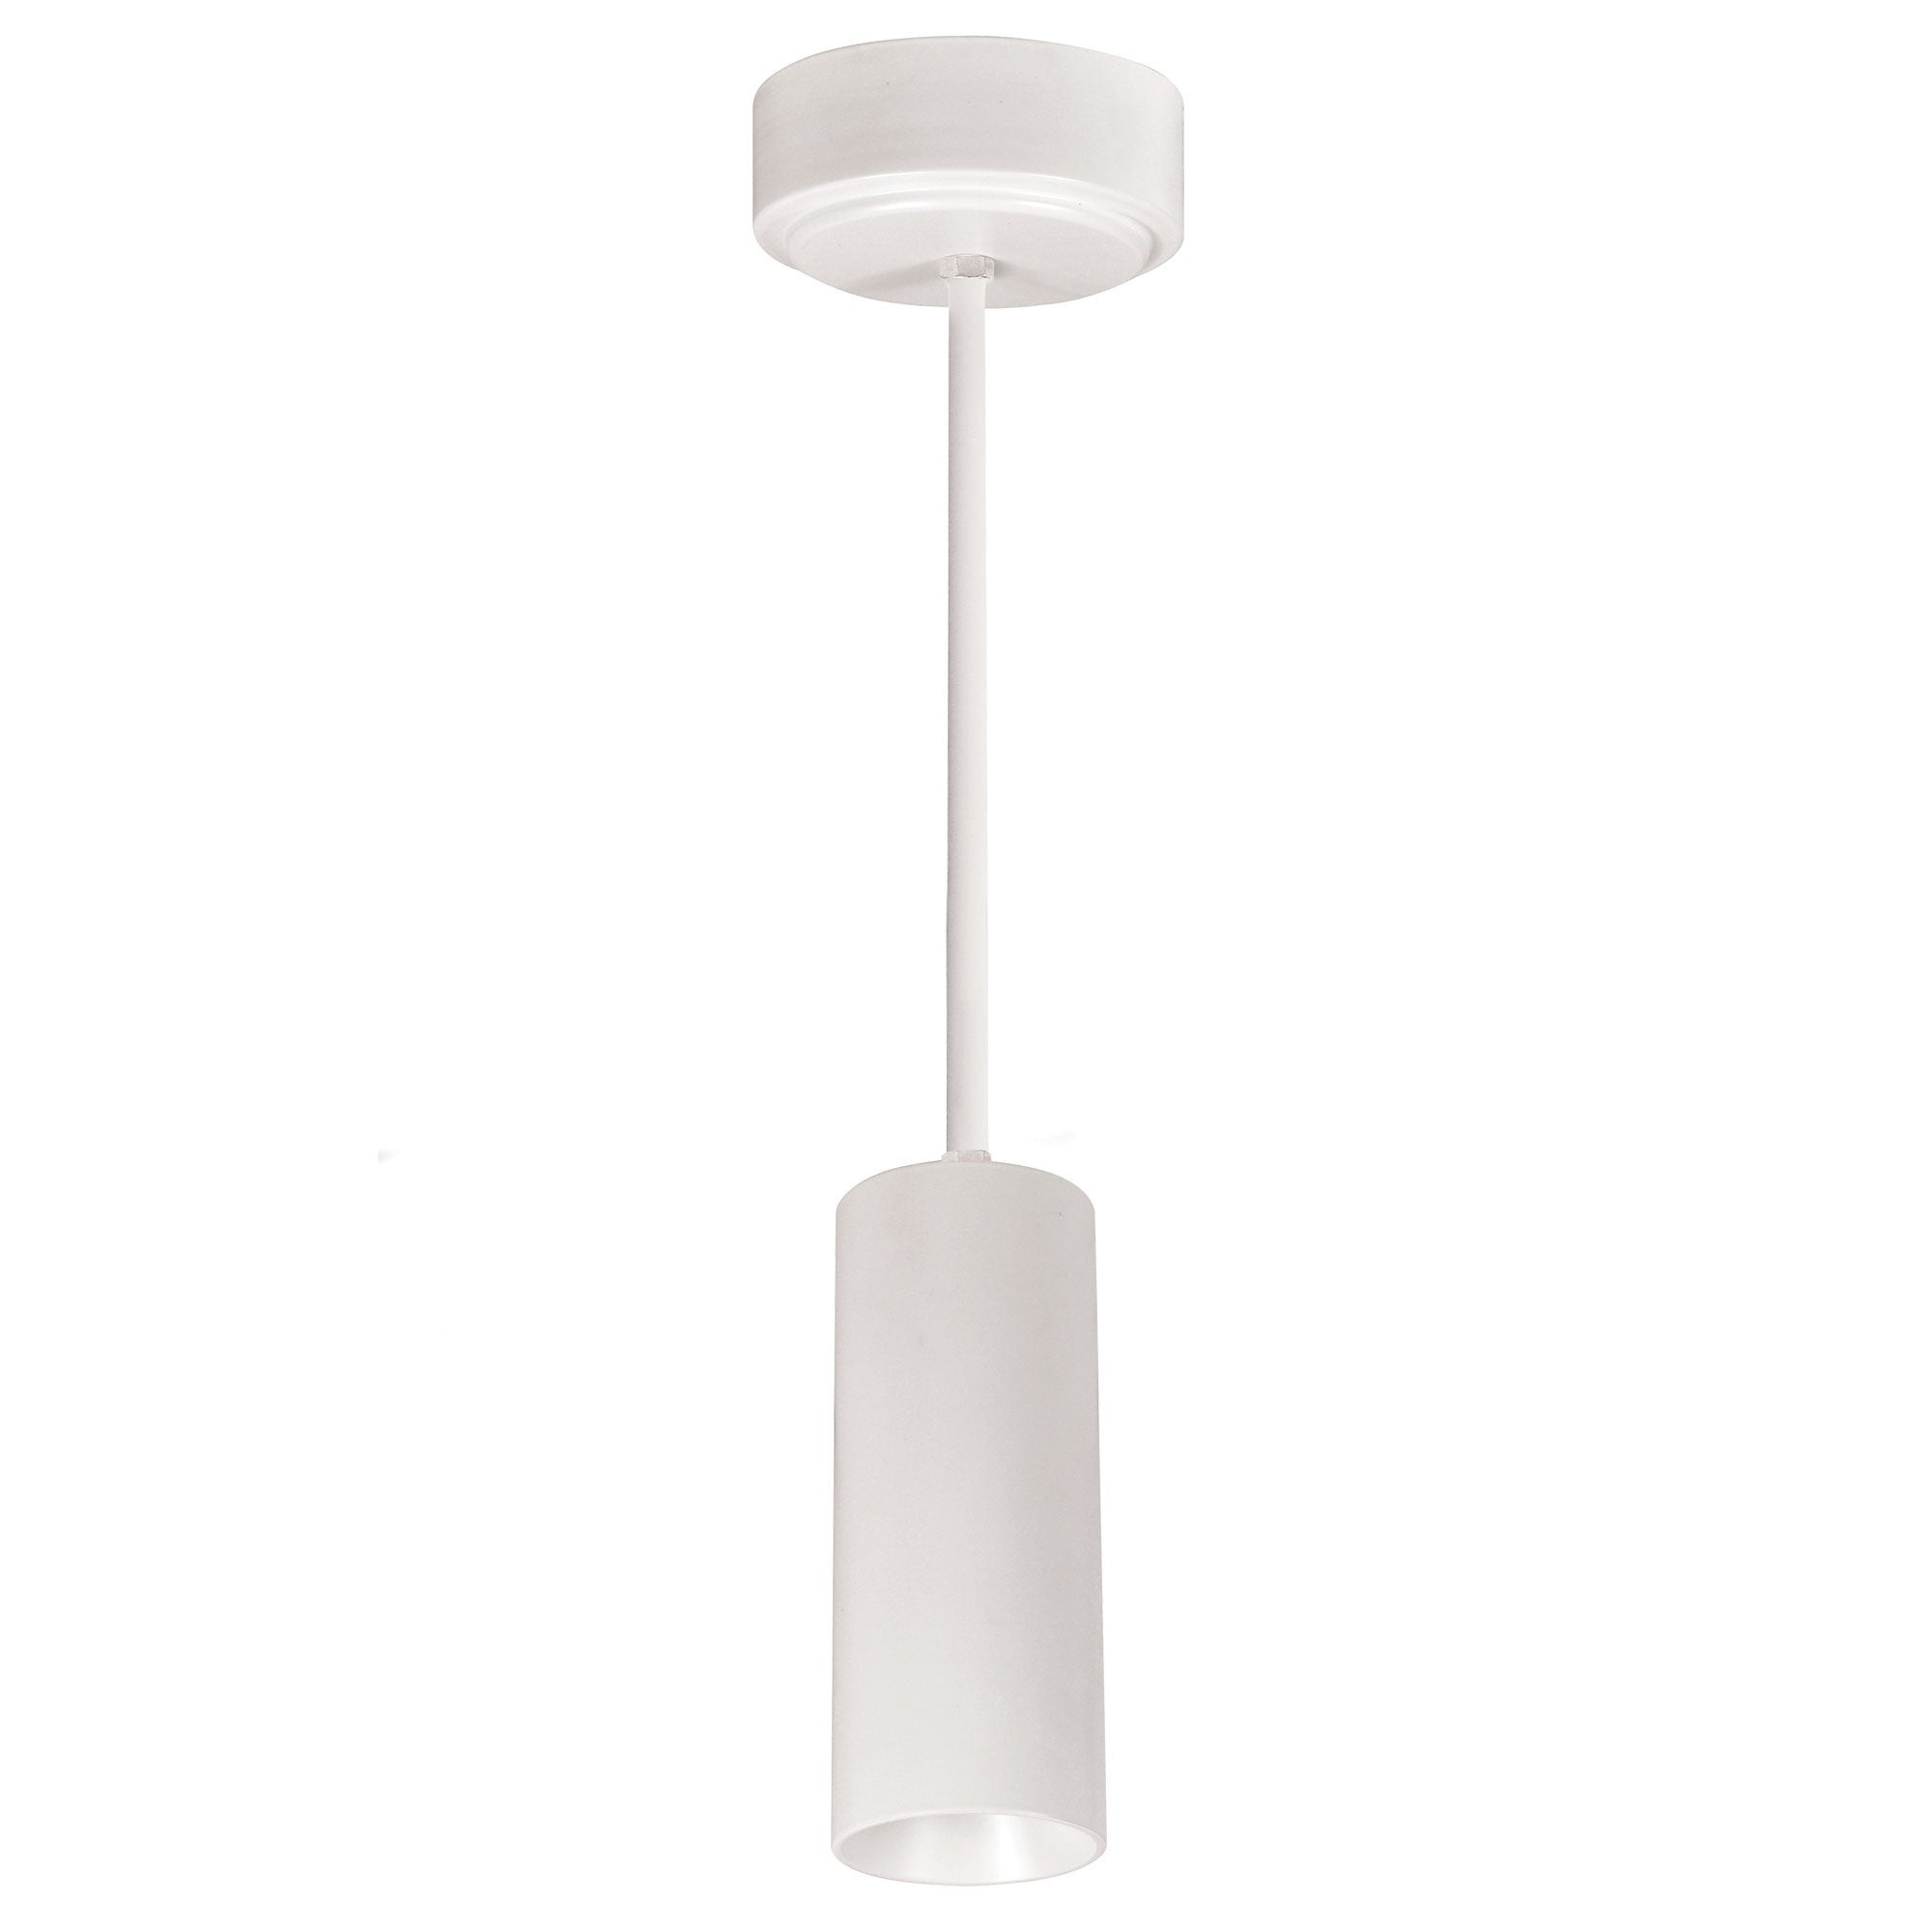 Nora Lighting LE56 - NYLM-2ST30XBBLE4A/12 - Cylinder - White